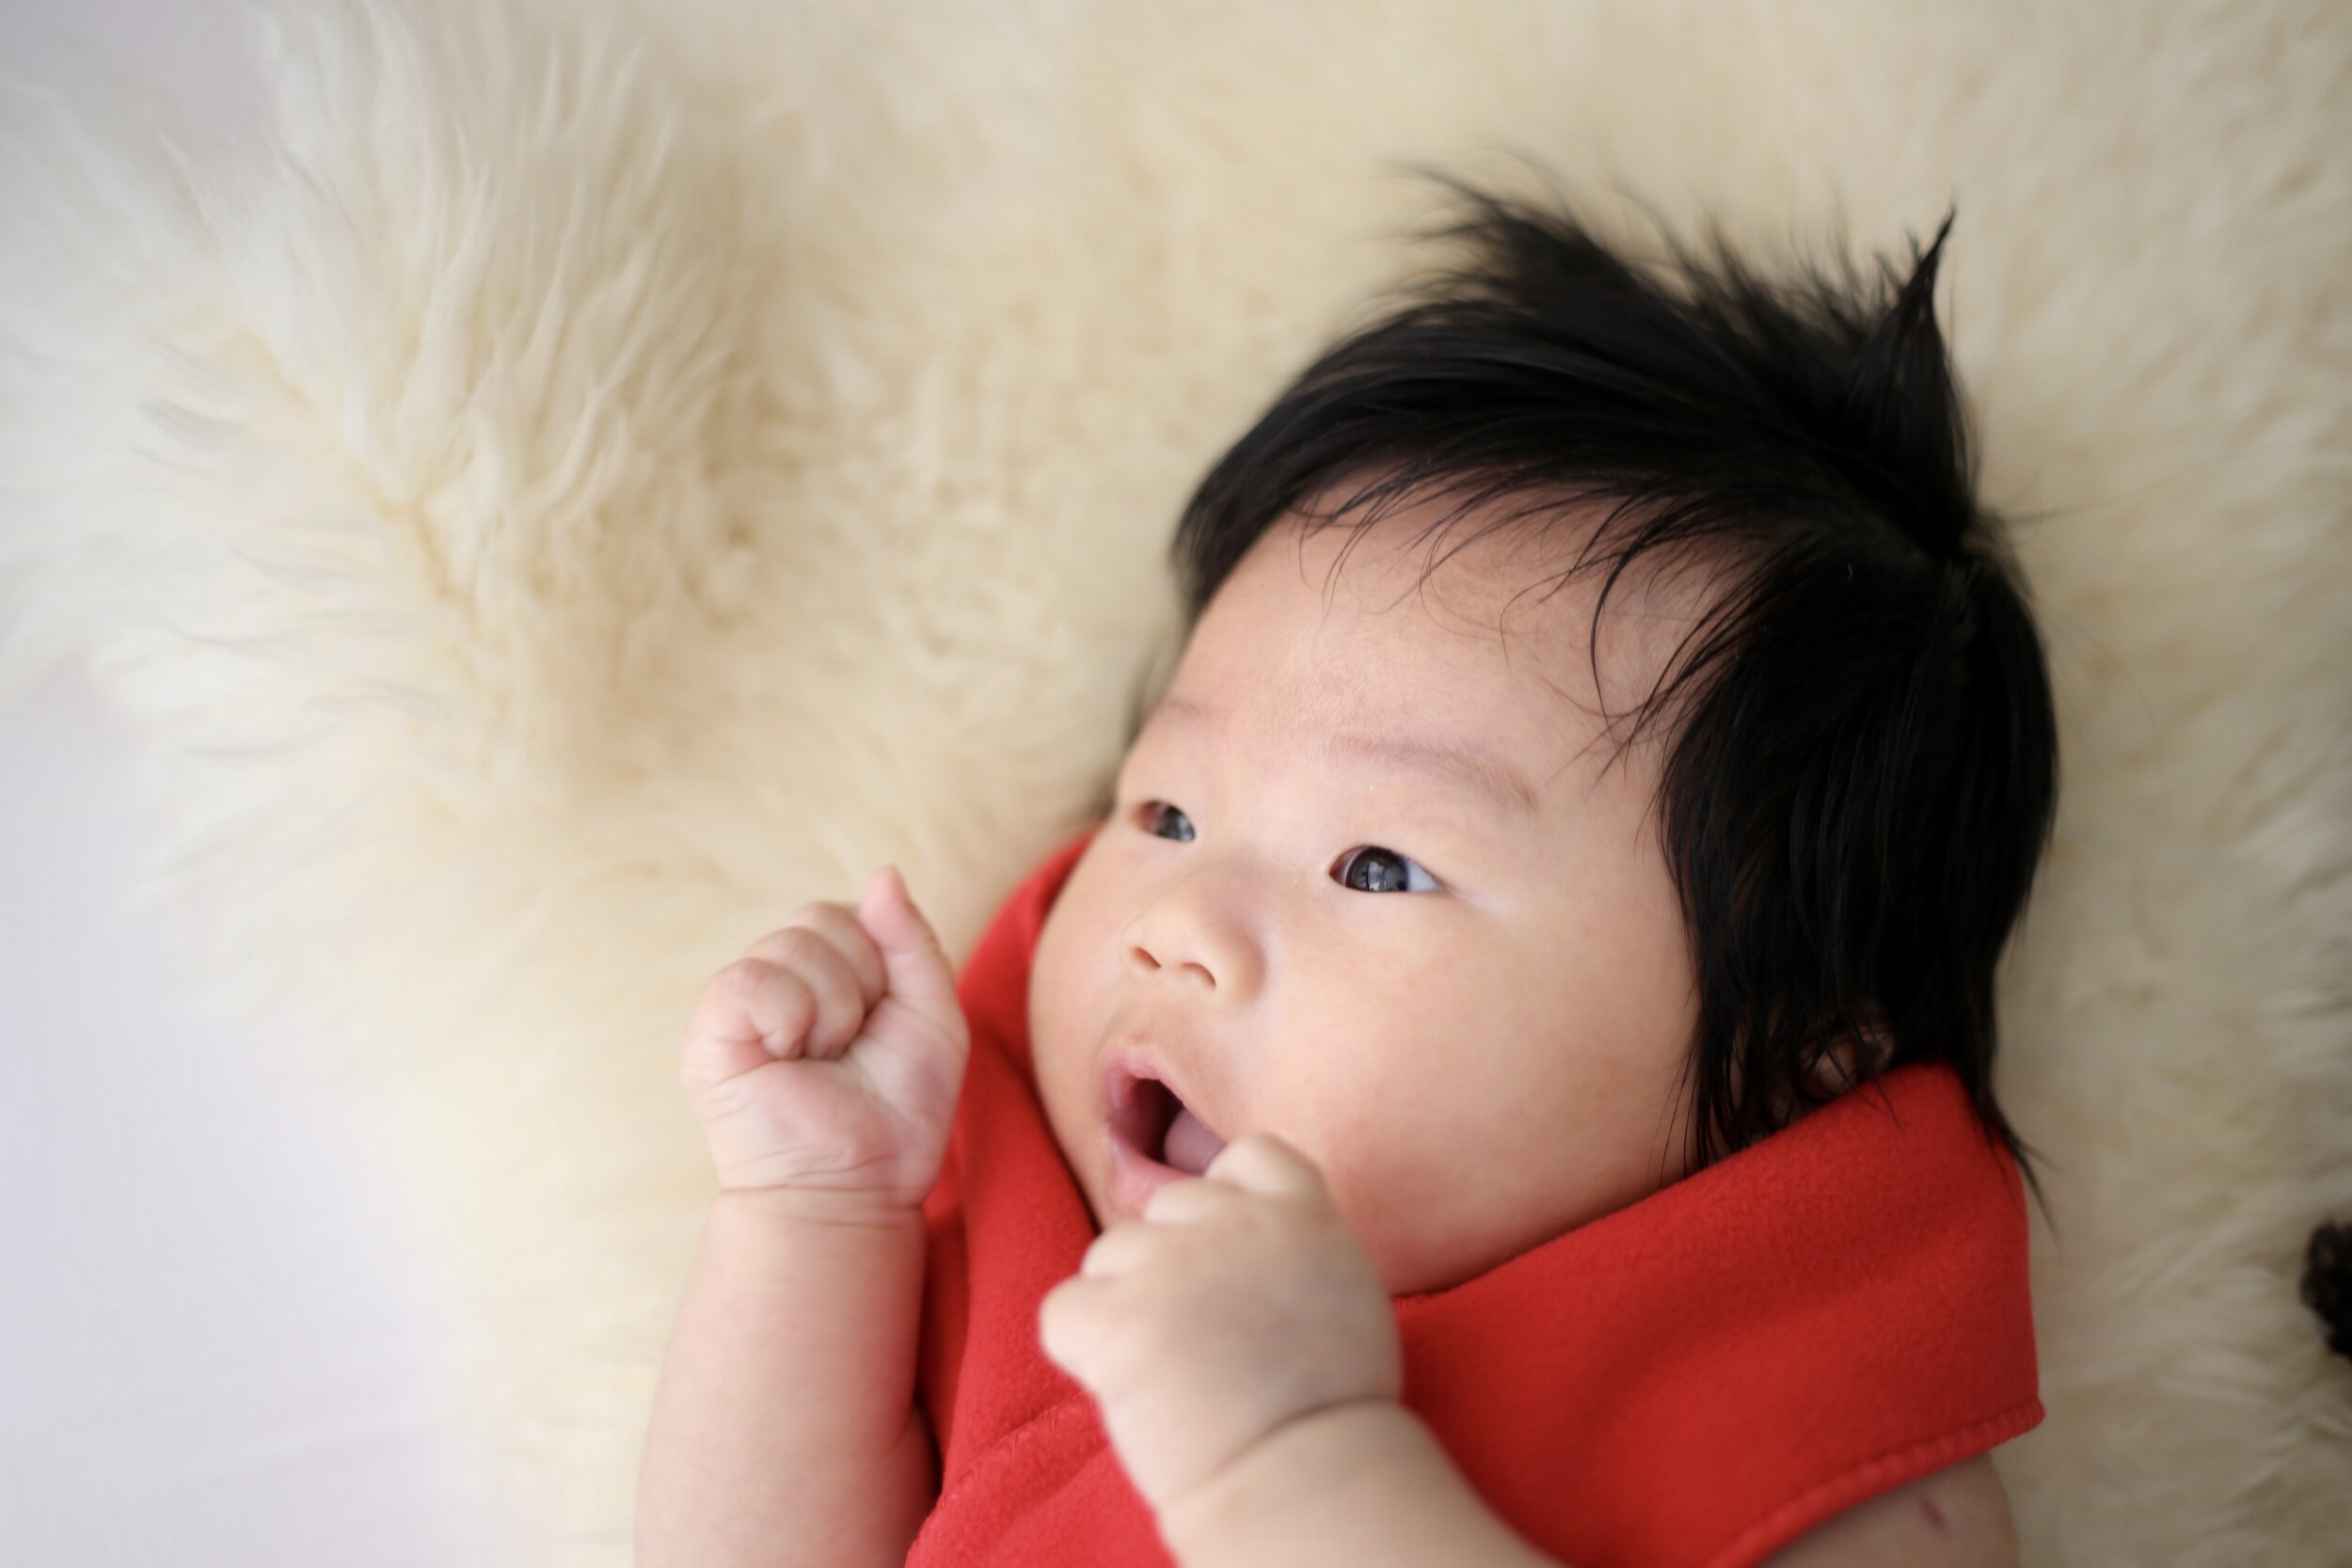 Cooing and babling are the first stages of speech and language development.